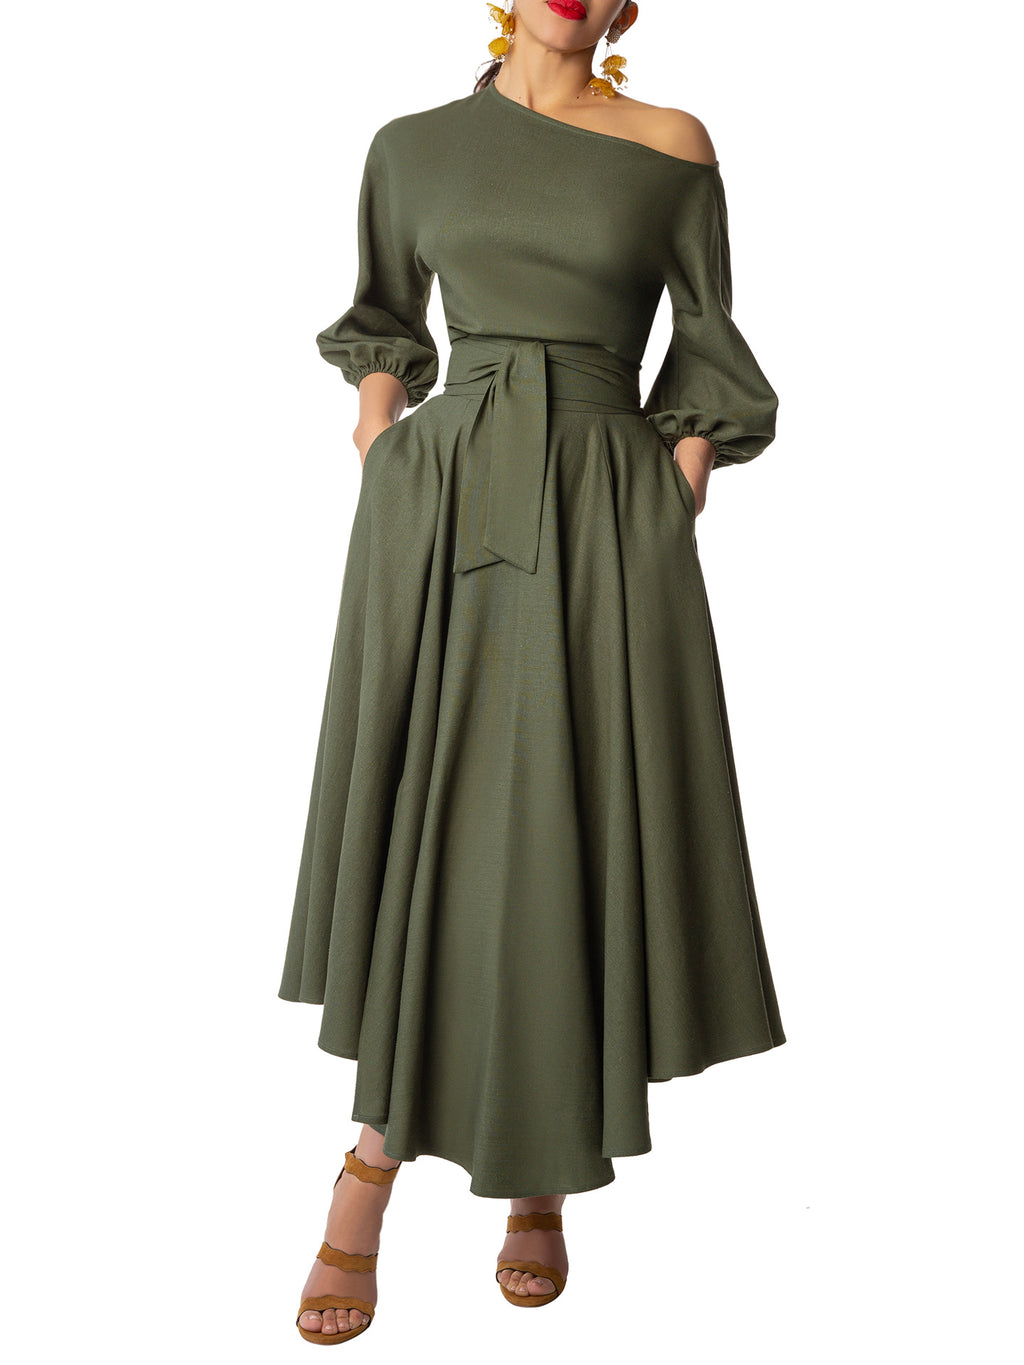 Green Pointed Collar Swing Dress